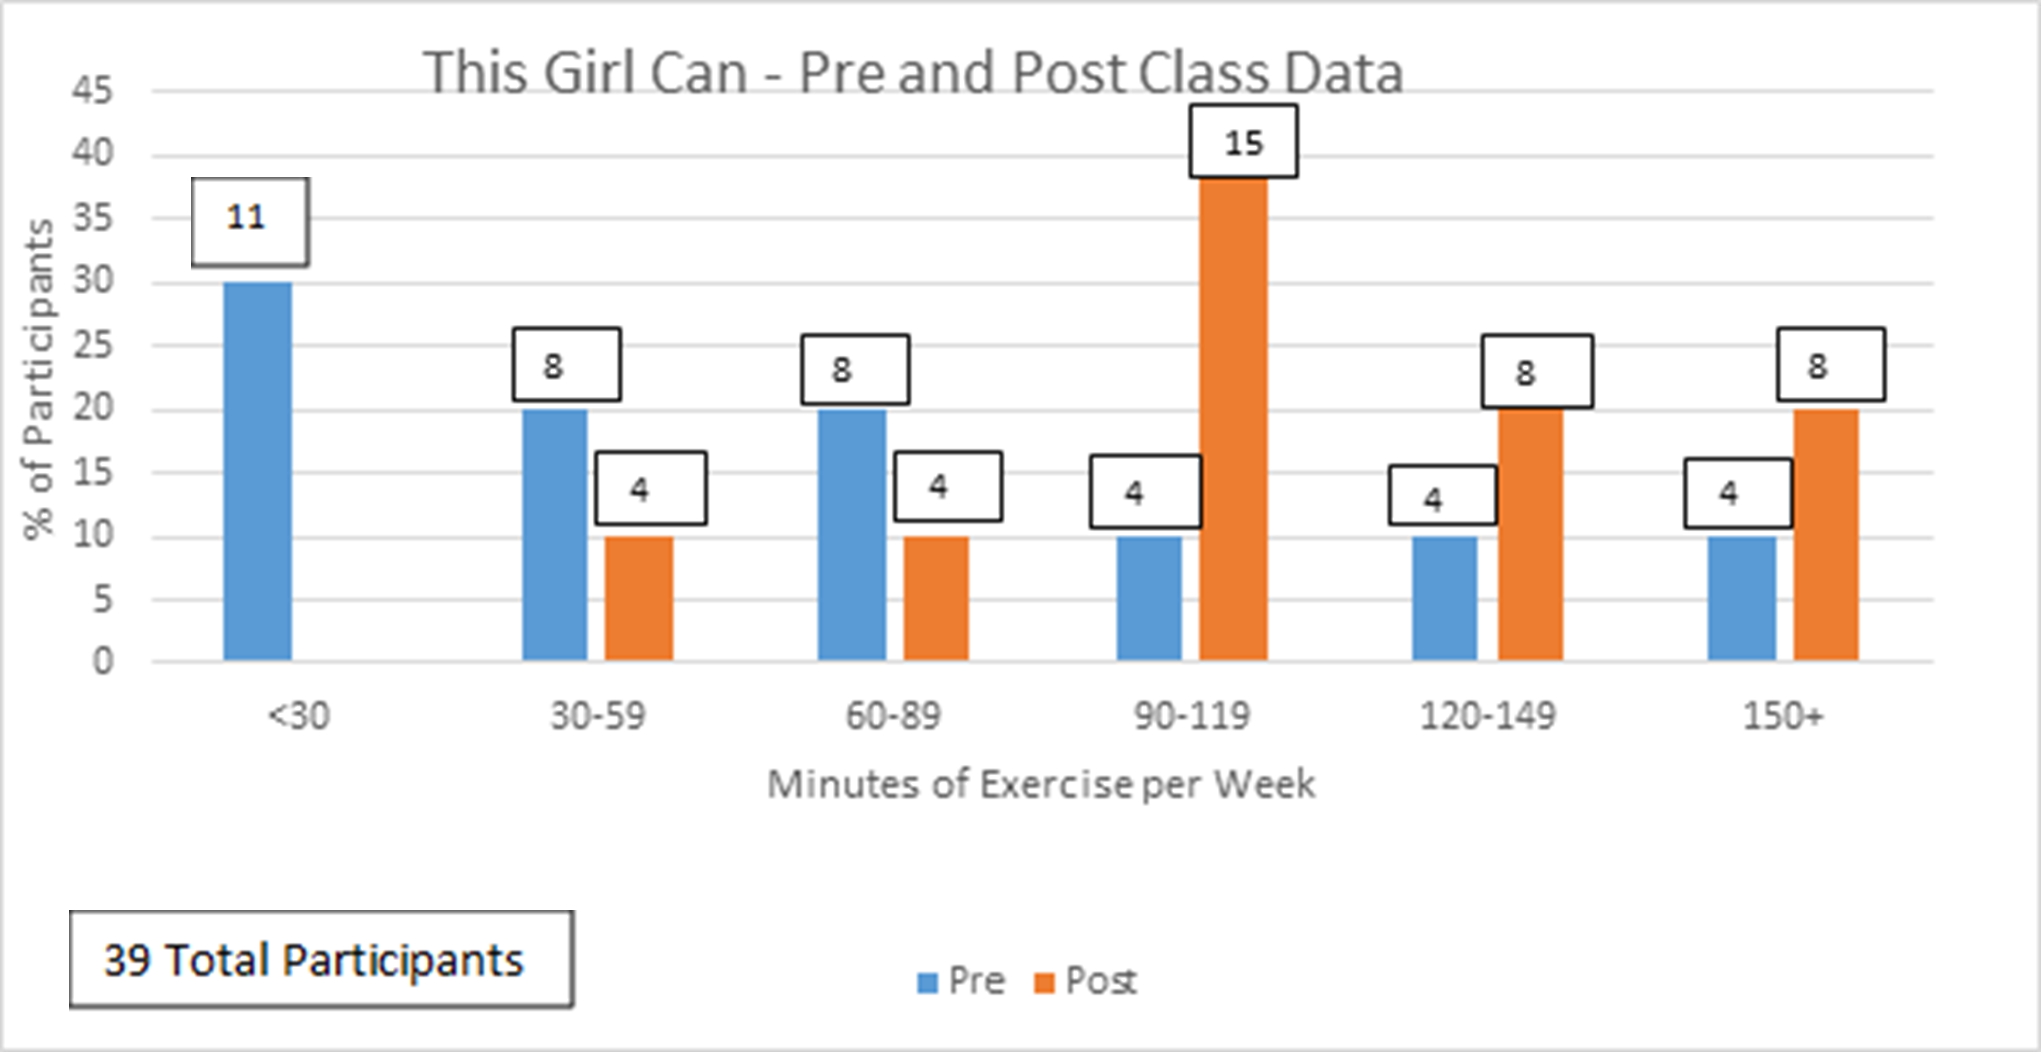 Participants and how group’s activity levels increased. 39 participants. Before the programme, 11 did under 30 minutes physical activity per week. By the end of the programme, this was 0. 8 people did 30-59 minutes exercise before the programme compared to 4 after. Results same at 60-89 minutes of exercise. 4 people participated in 90-119 minutes exercise before the programme, increasing to 15 afterwards. 4 people did 120-149 minutes exercise before the programme, increasing to 8 afterwards.